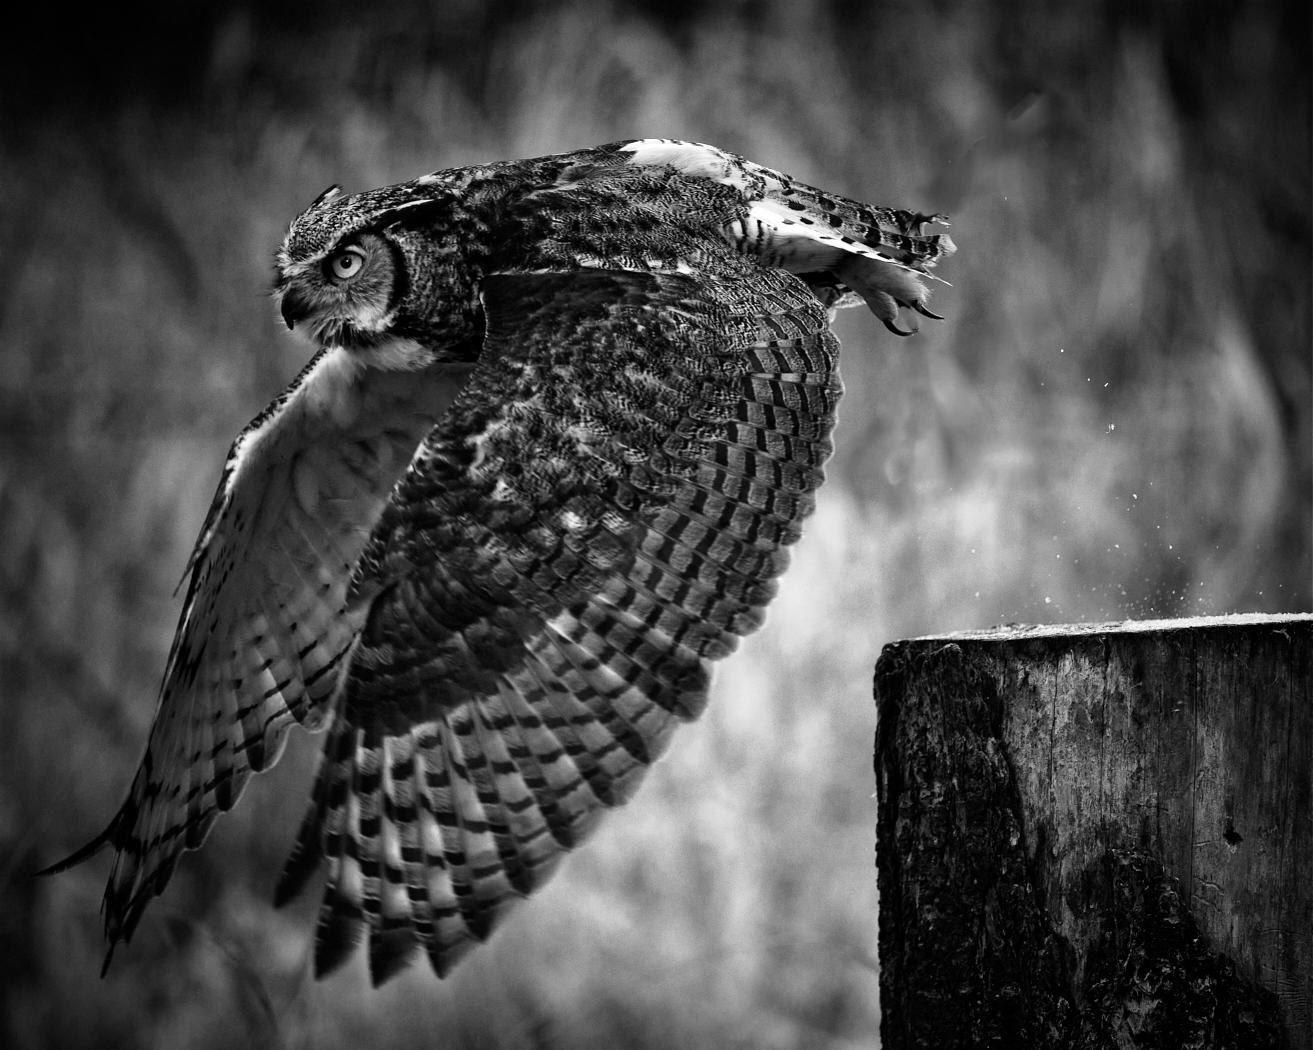 Hunting Owl by Nick Delany